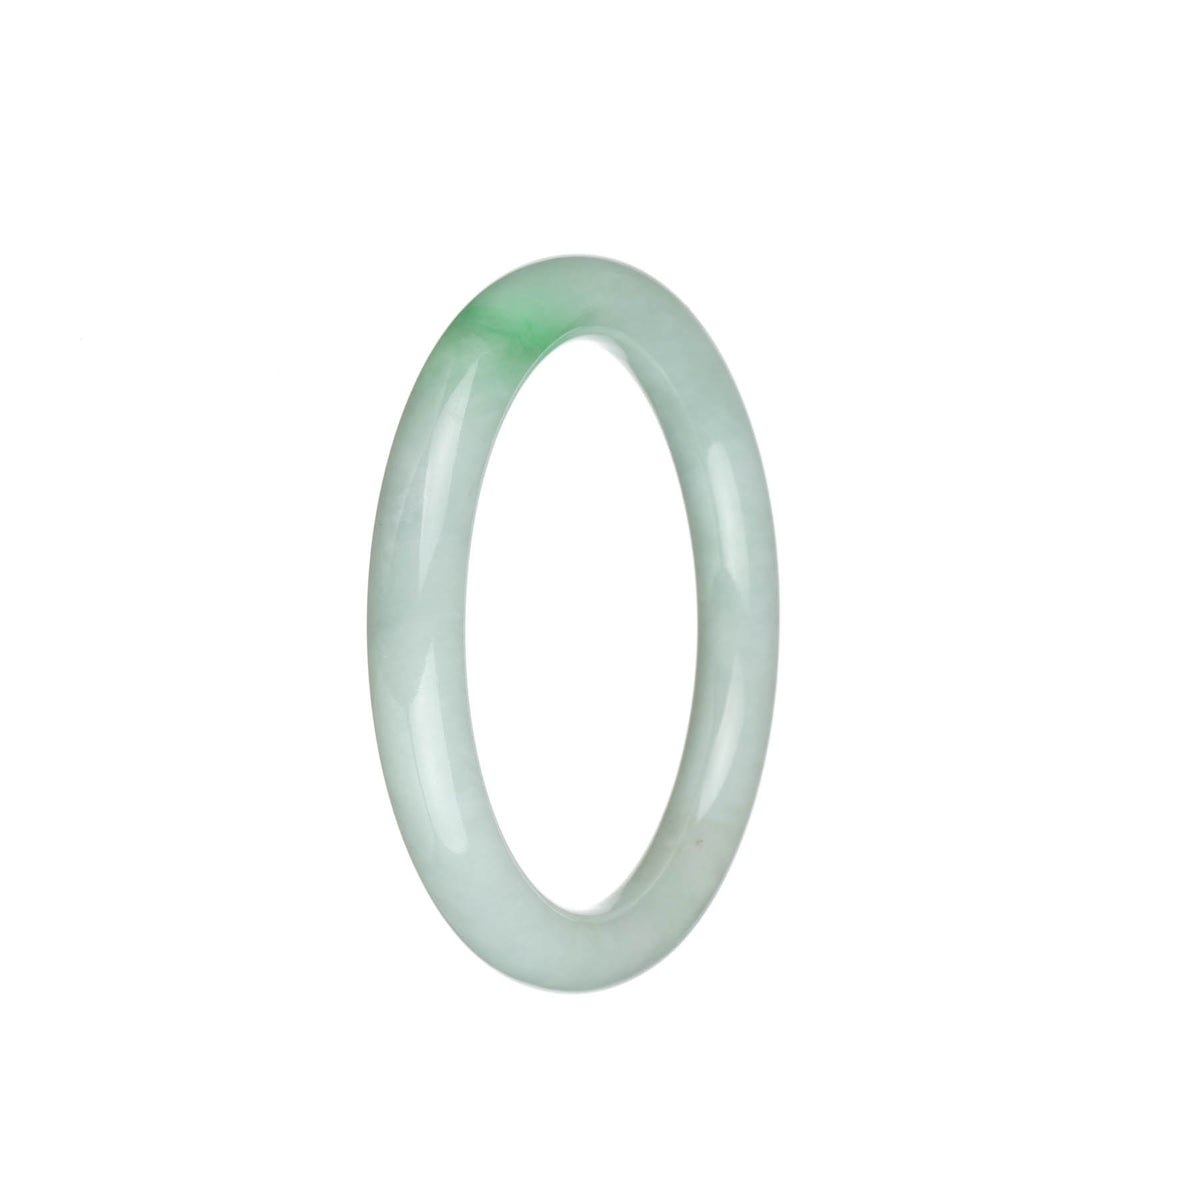 Authentic Grade A White with Apple Green Jade Bangle - 54mm Petite Round